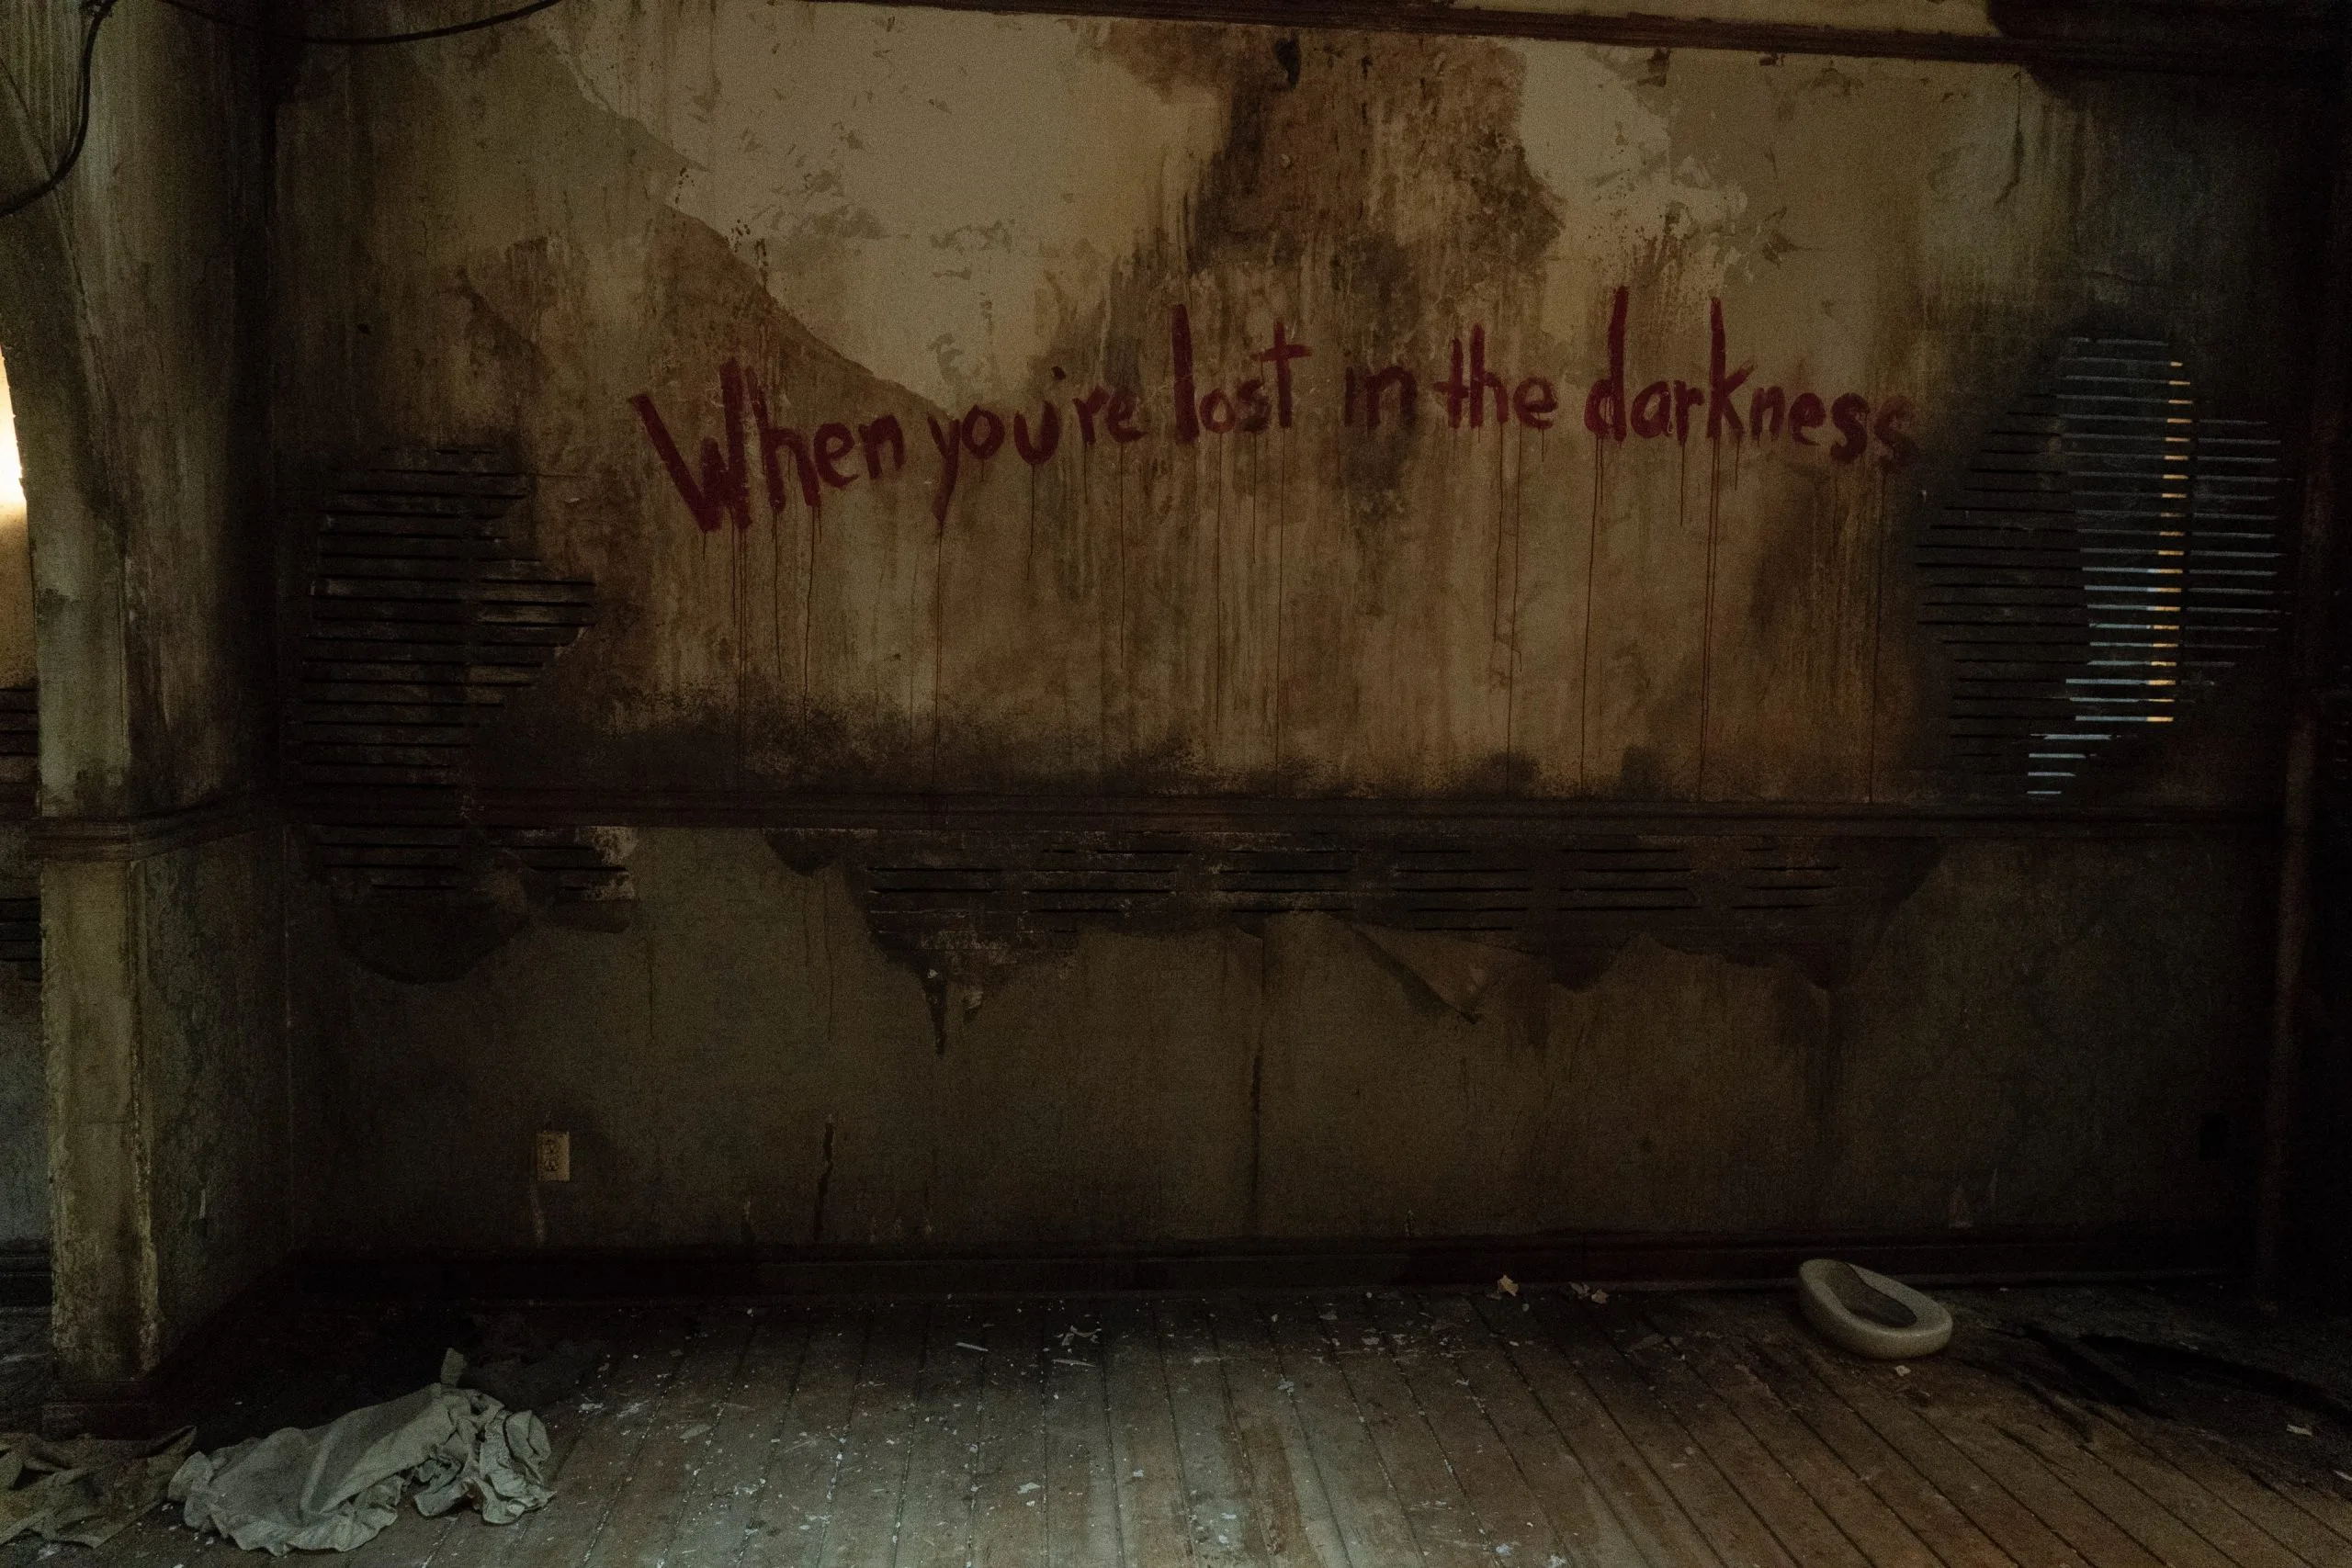 PM @ TILT: The Last of Us Season 1 Episode 1 Review – “When You’re Lost in the Darkness”